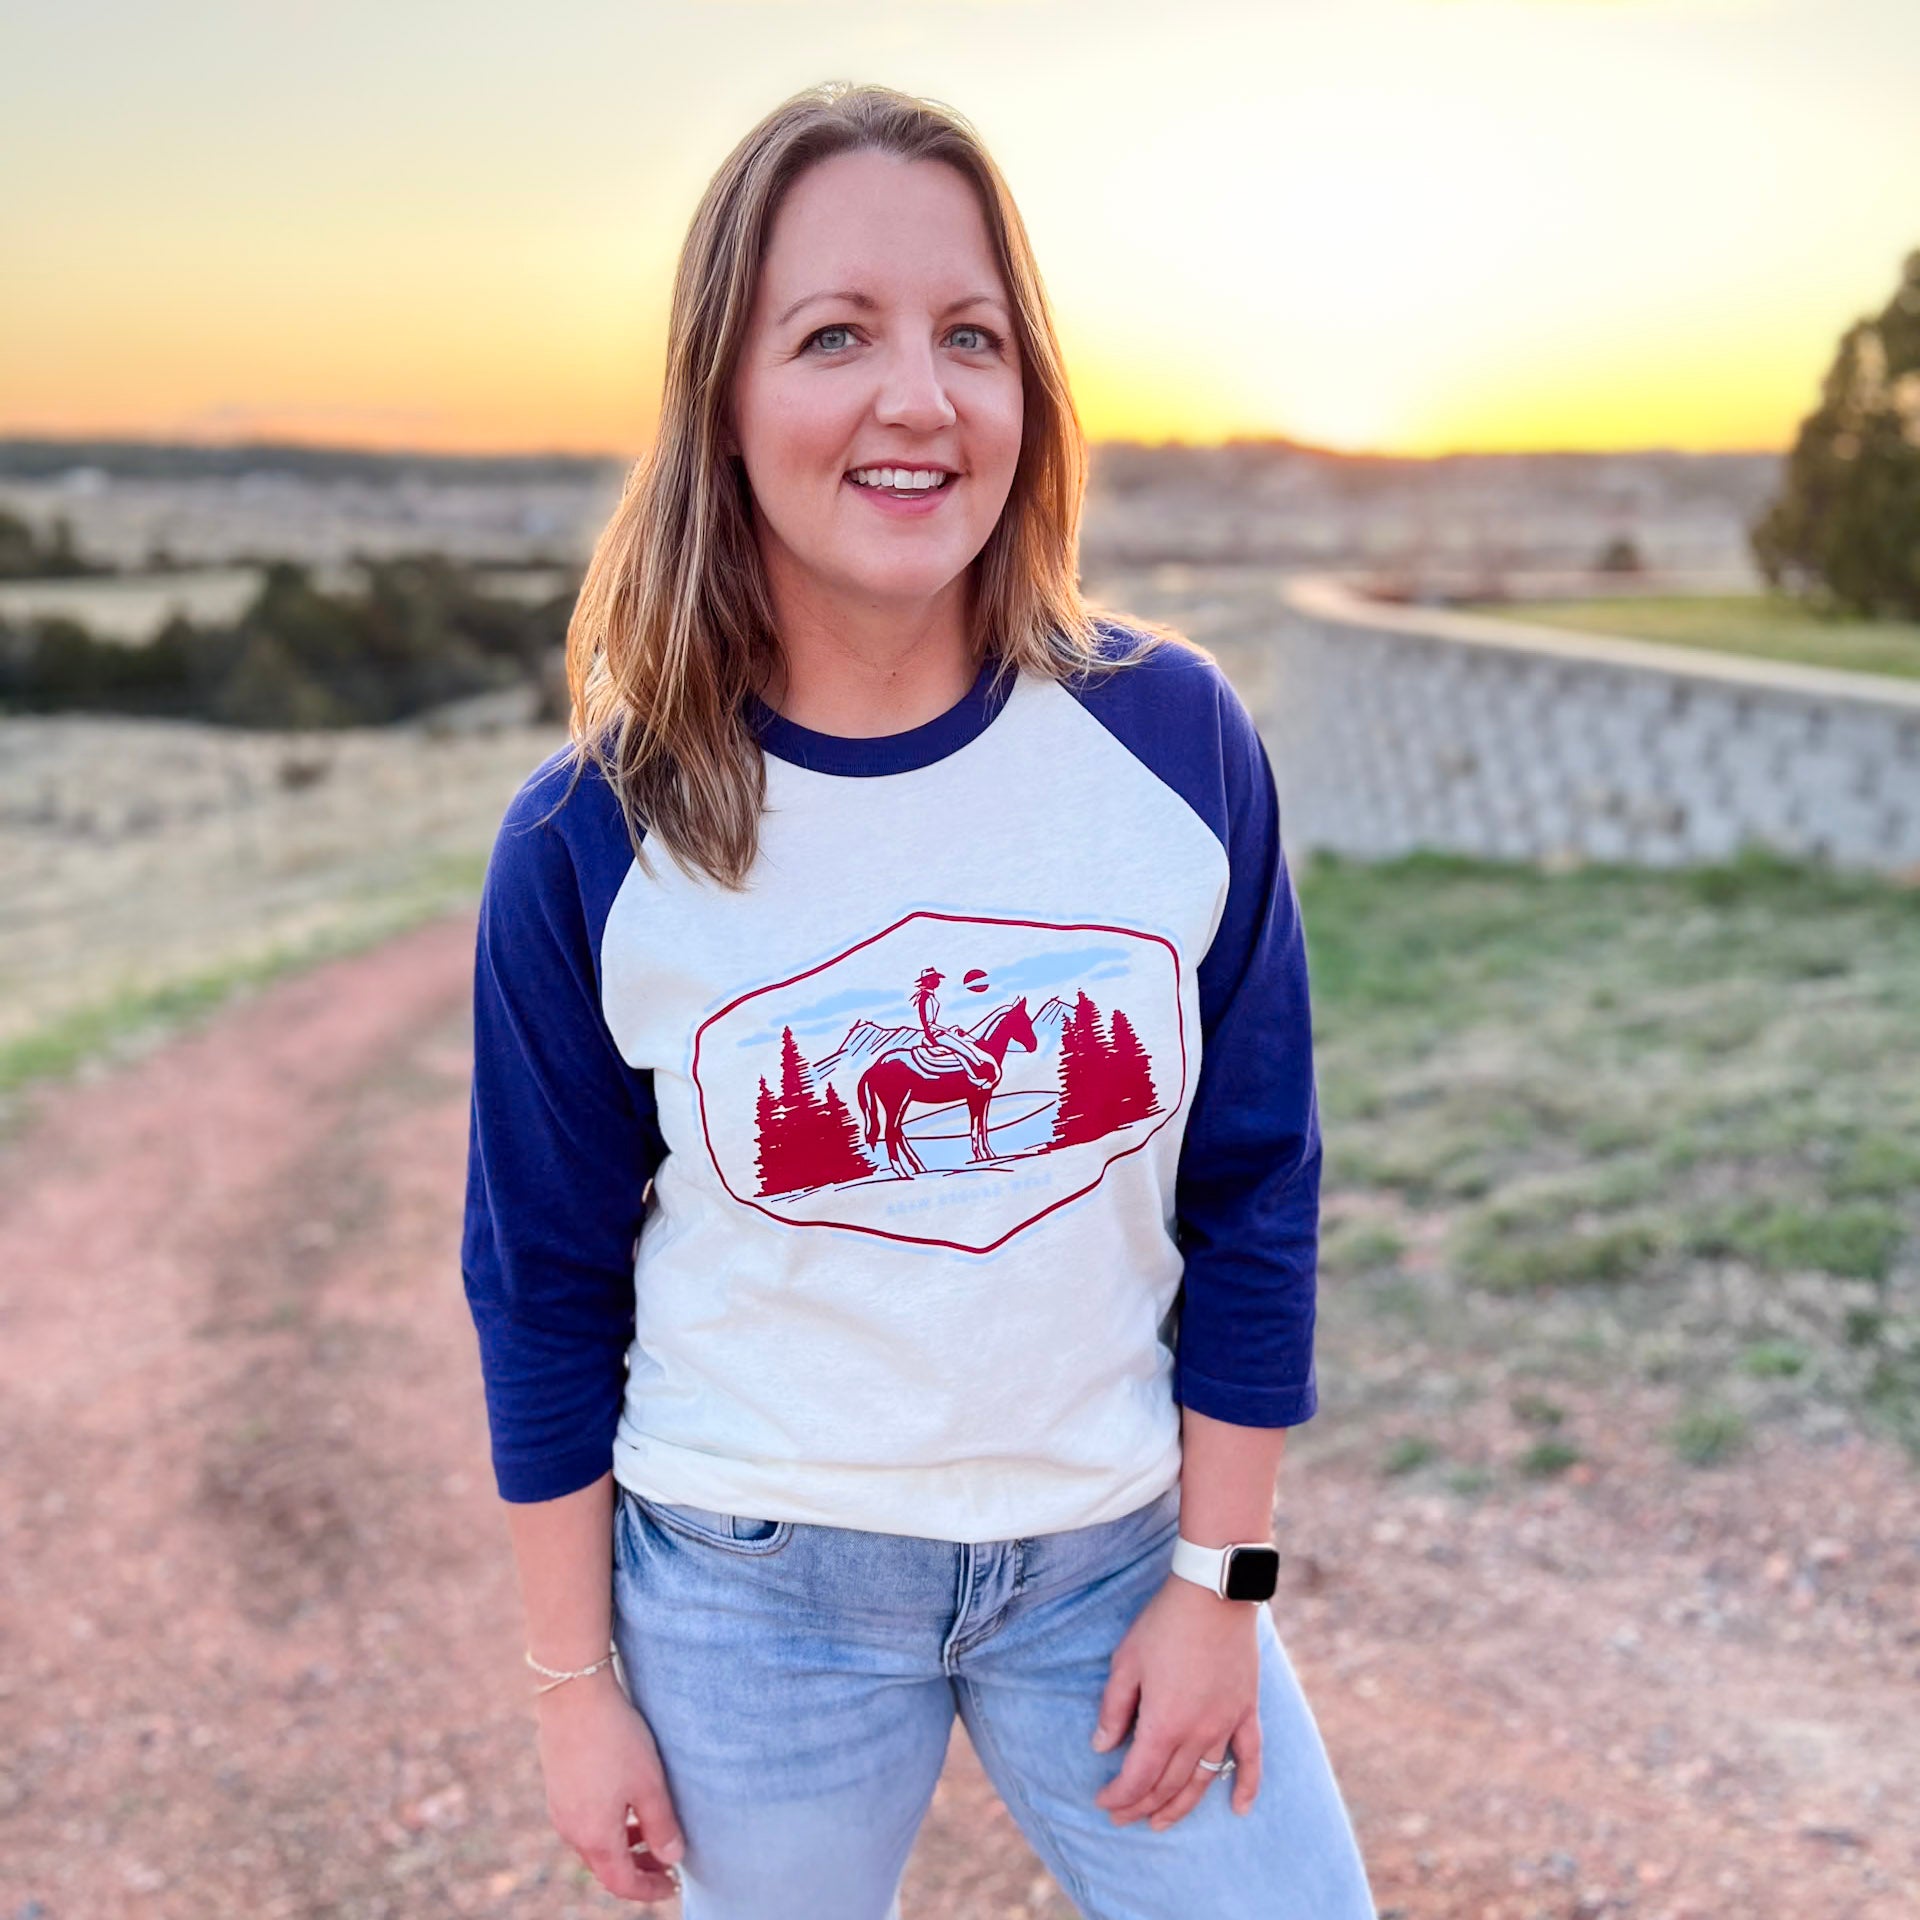 Americana cowgirl on horse tee. Baseball tee. Western americana tee. Roam Around Wear is a Wyoming t-shirt company based out of Gillette, Wyoming